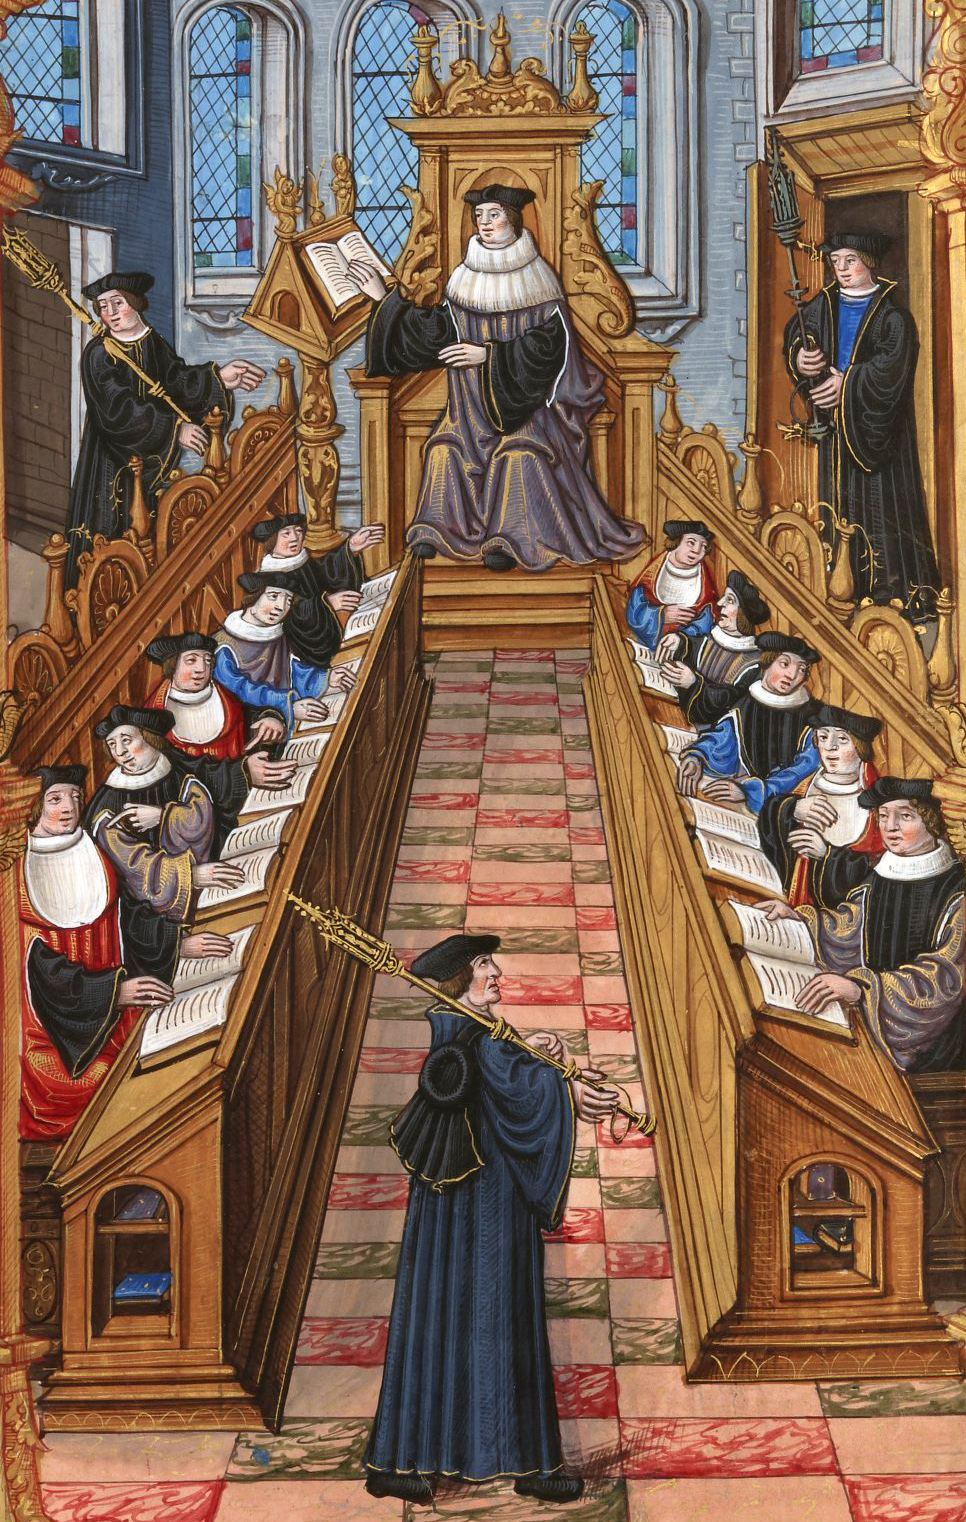 A painting of scholars meeting at the University of Paris. One scholar sits at the center of the room with a hand on a book. Two others stand in the background. Five scholars sit at a long, ornate desk on the left side, five on the right. Books are in front of them. One more stands in the foreground.